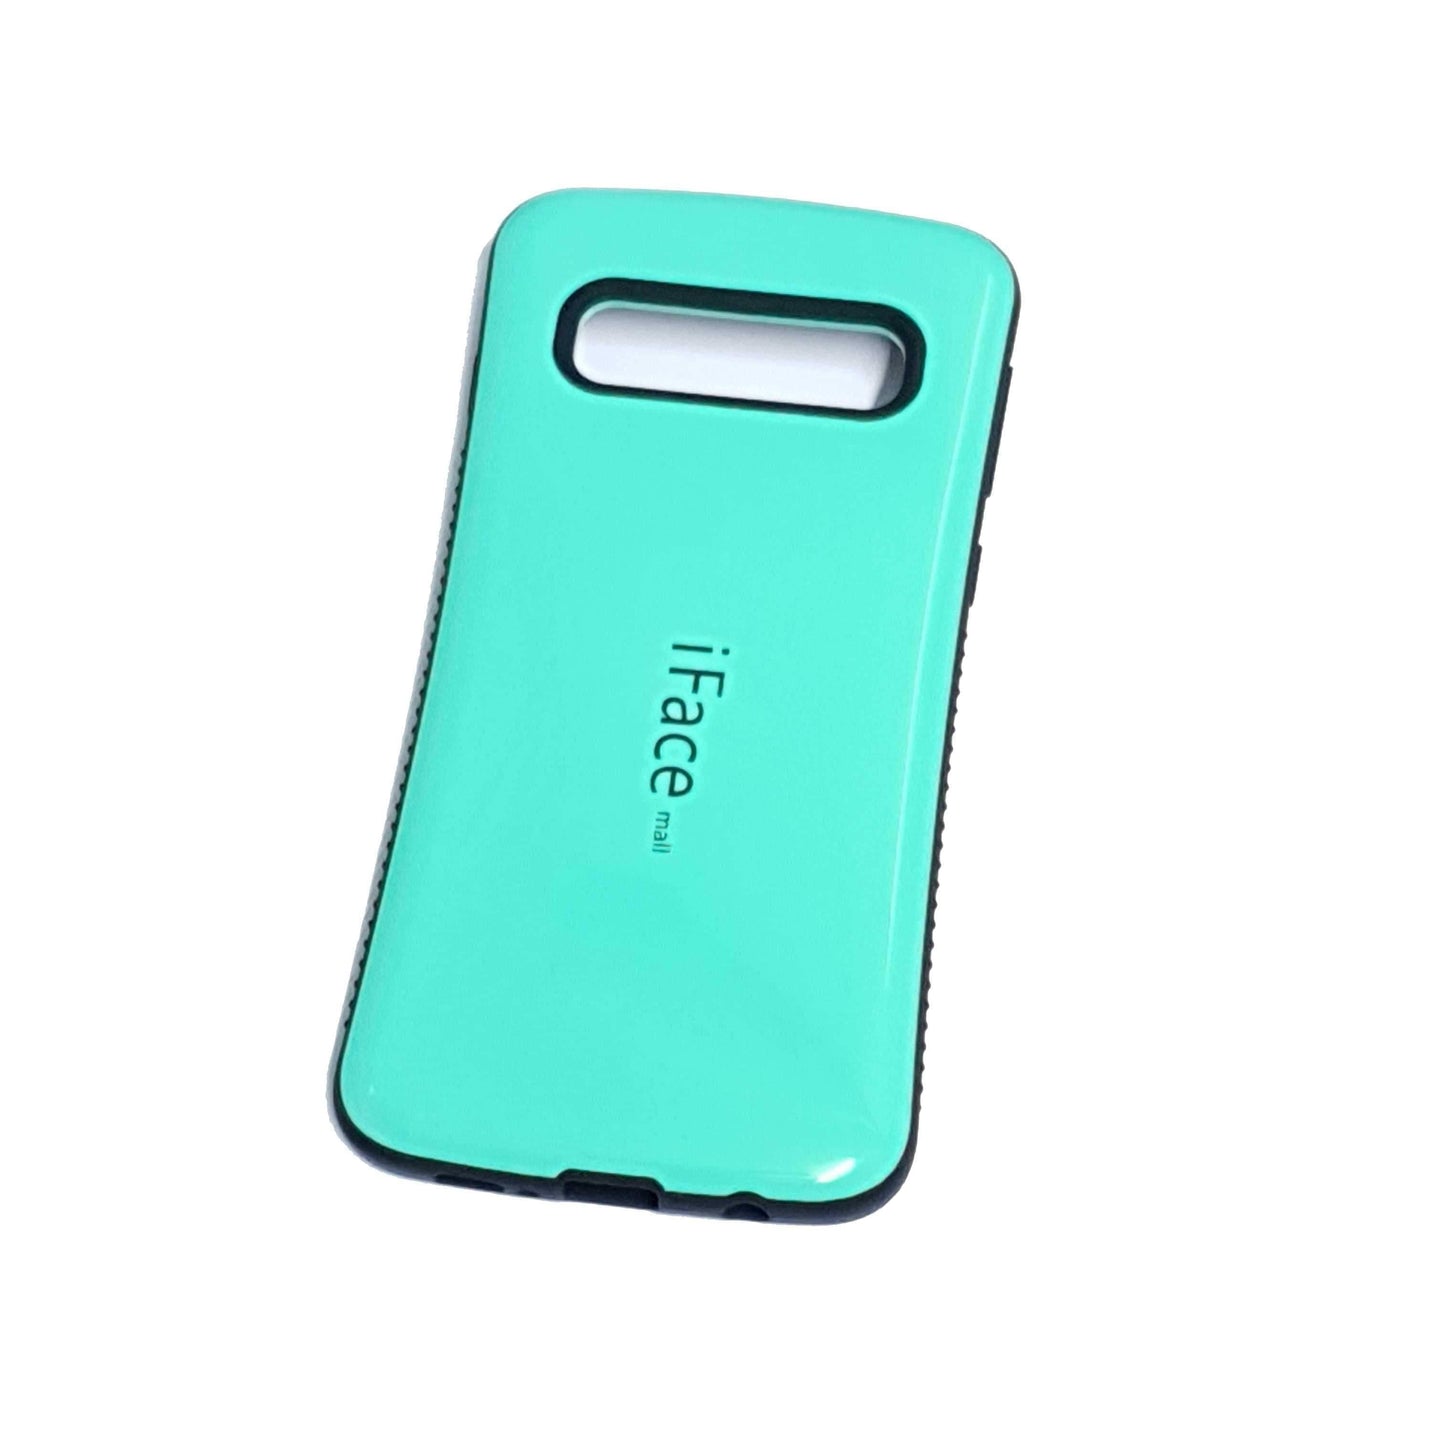 Samsung Galaxy S10/S10+/S10e 4G iFace Tough Rugged Colour Protective Back Case Strong-Phone Case-iFace-www.PhoneGuy.com.au